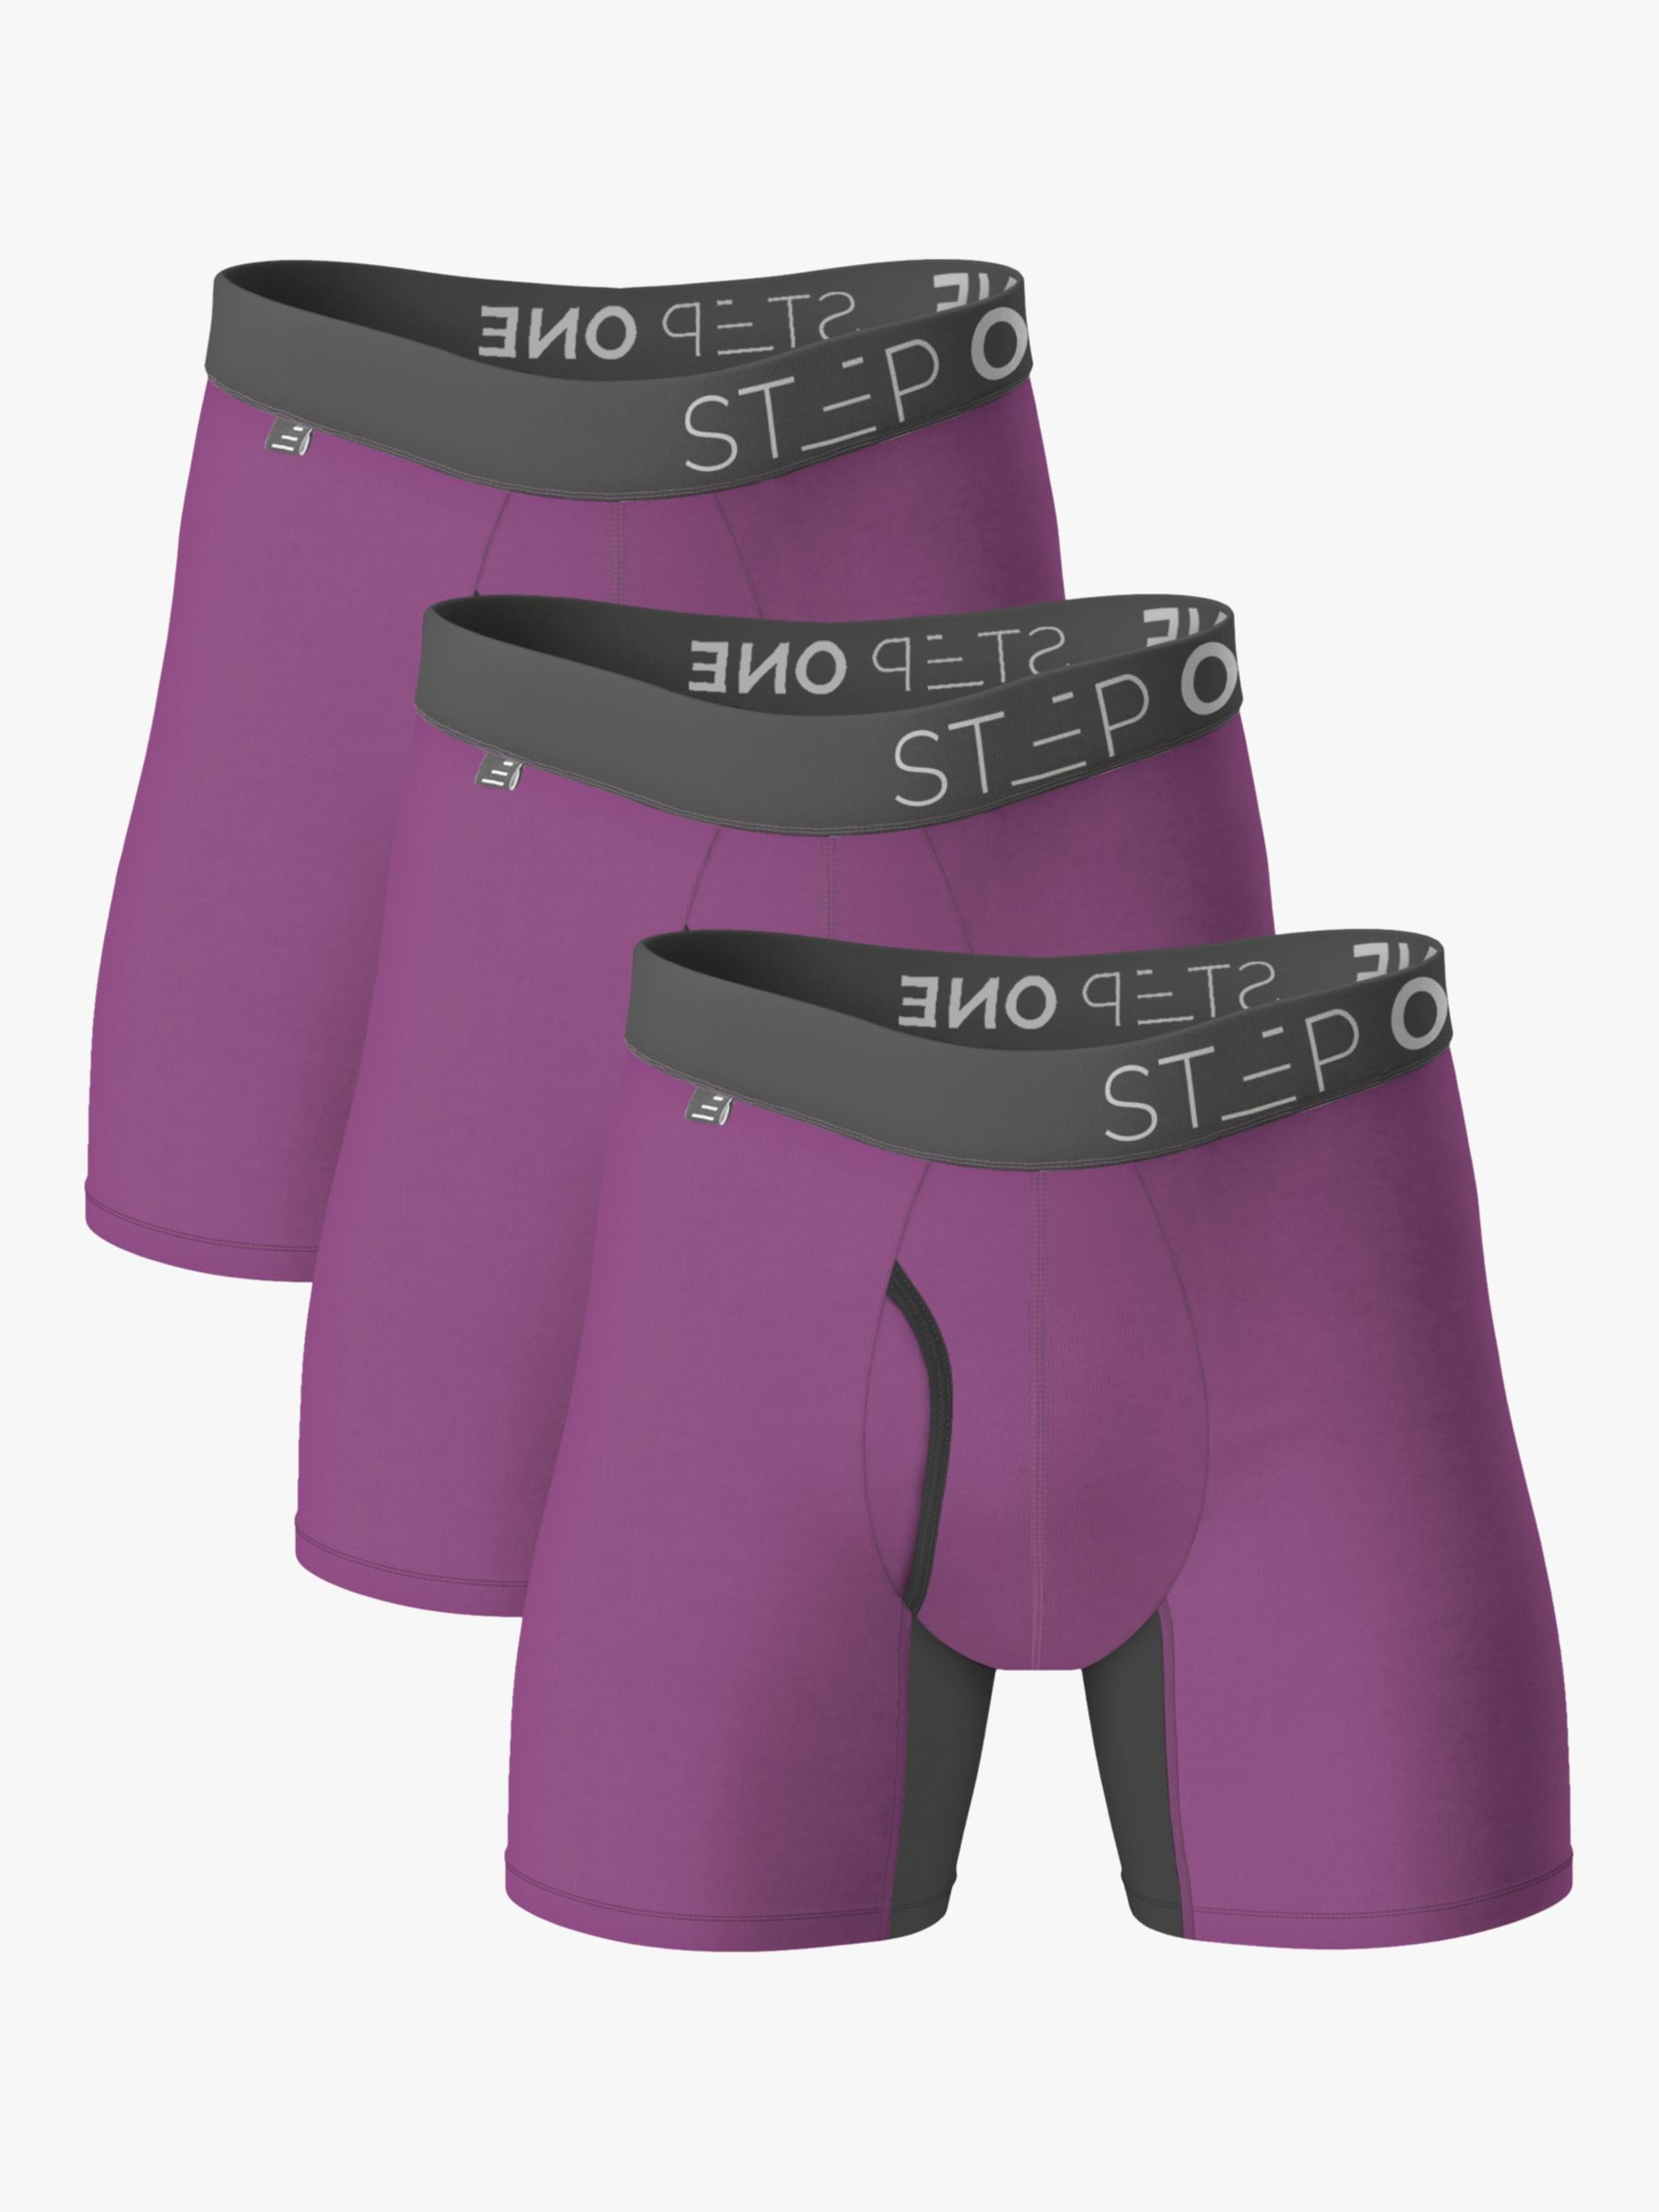 STEP ONE New Mens Boxer Briefs+Fly Bamboo Underwear - Various Colours and  Styles